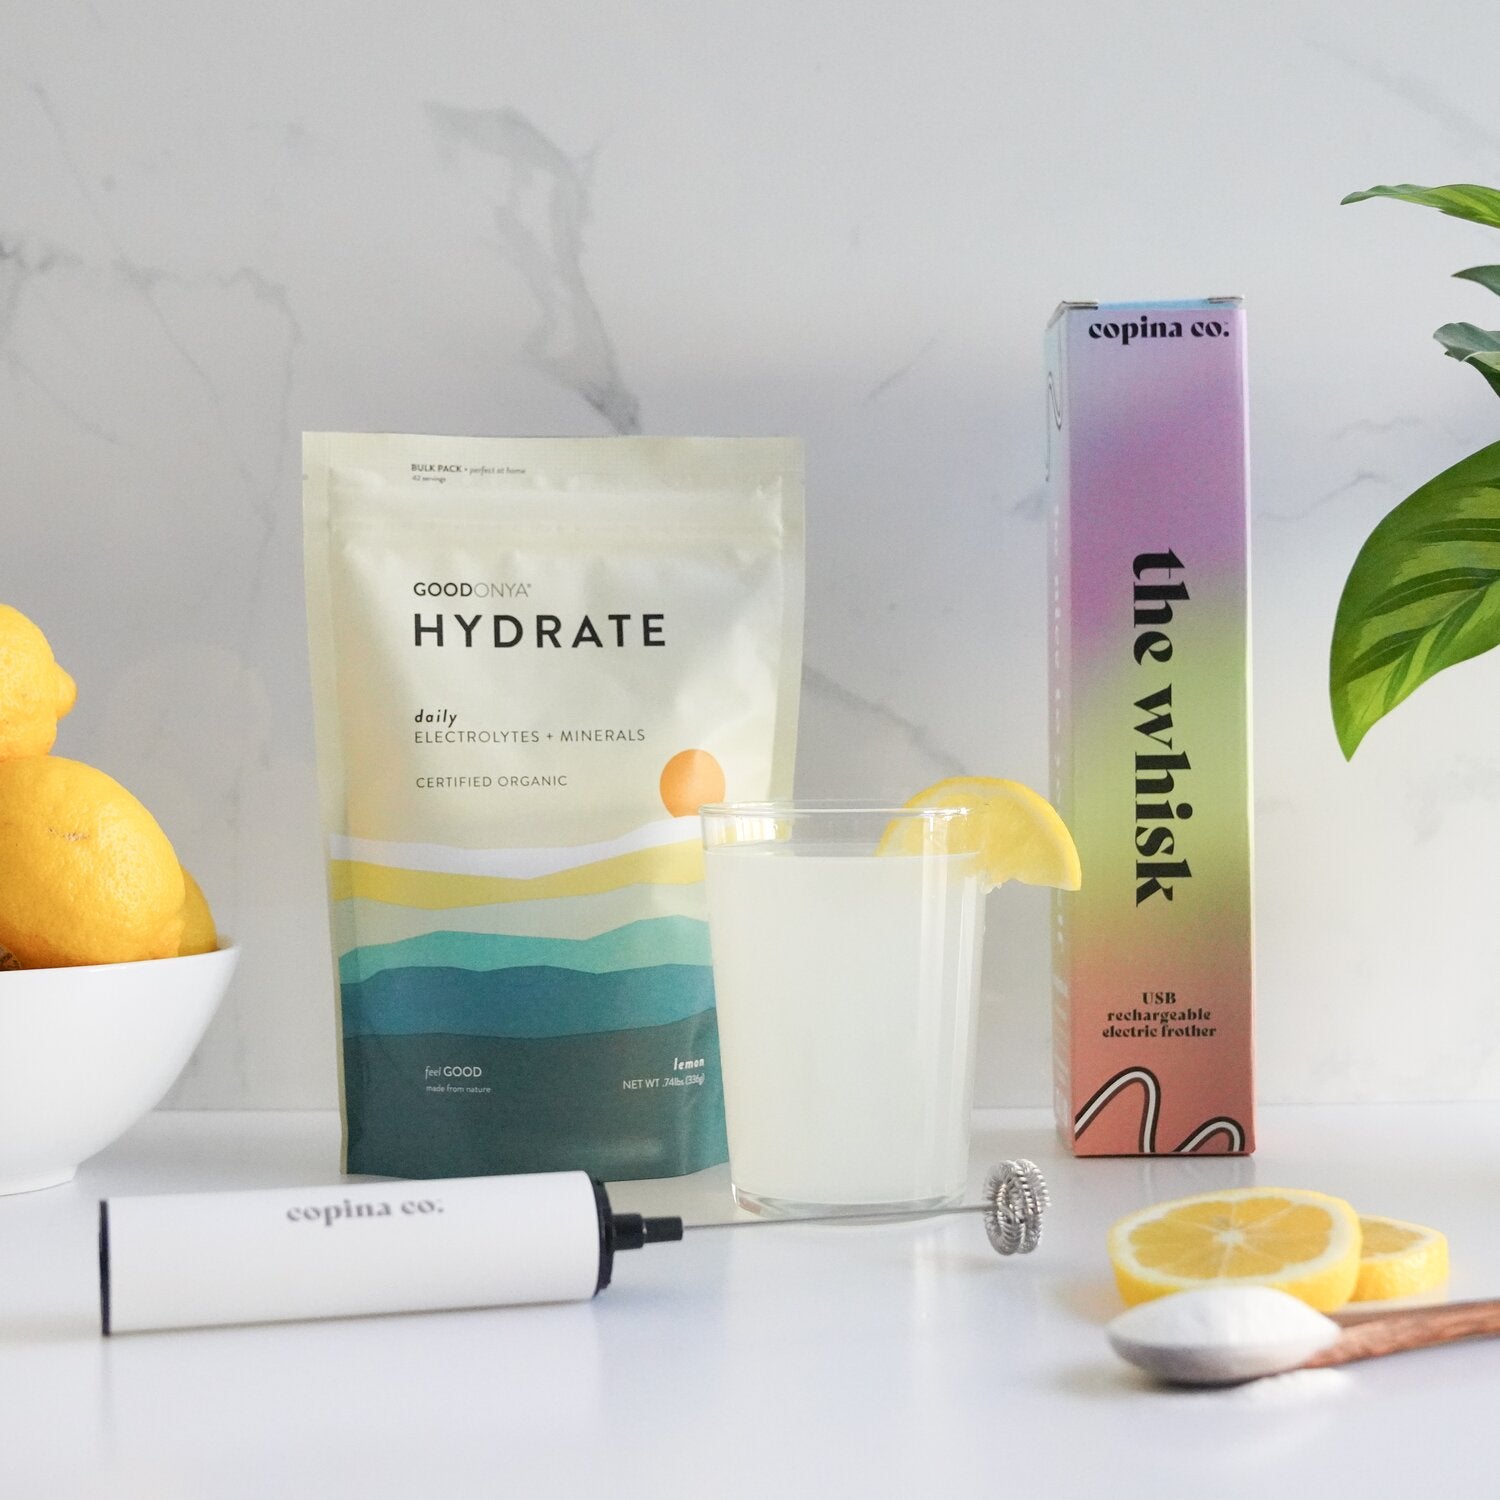 HYDRATE + Copina Co. Whisk Bundle